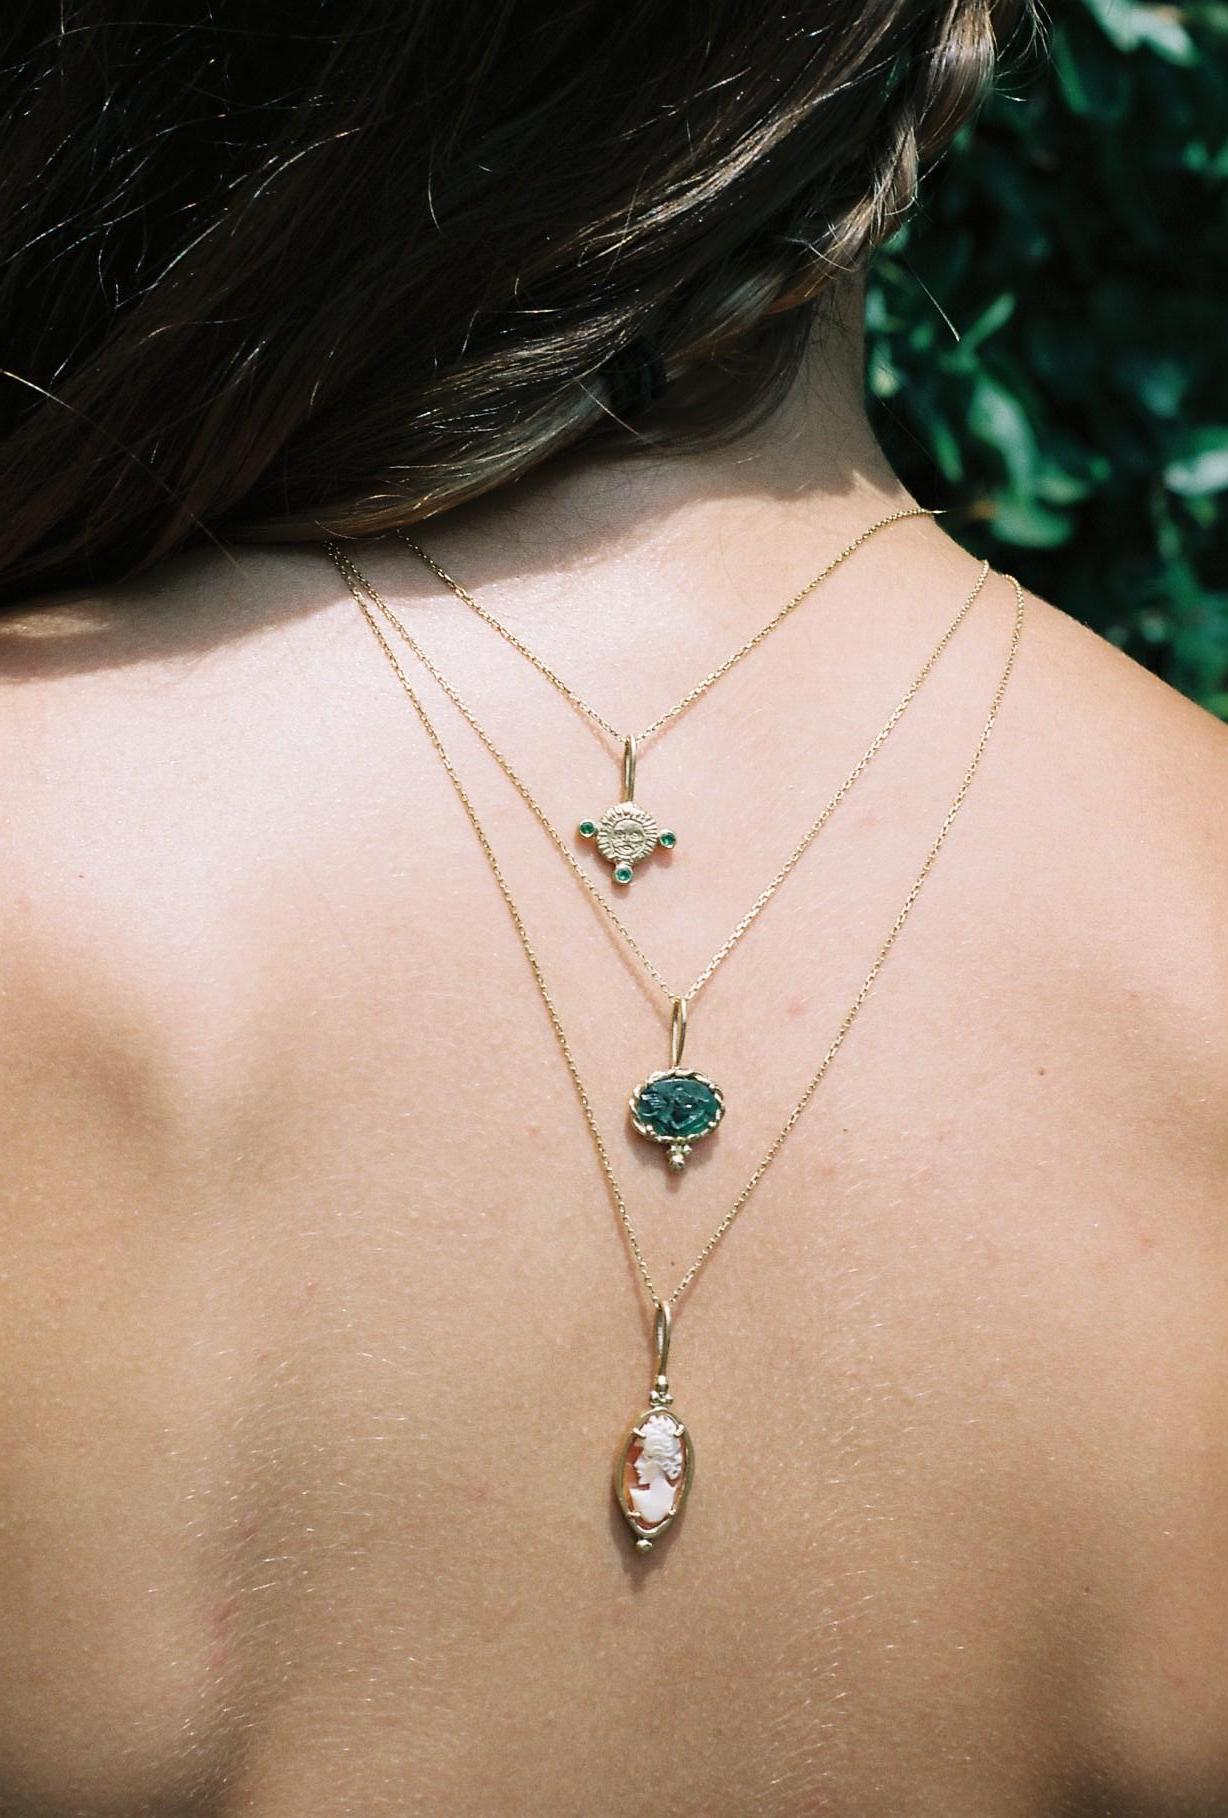 Brilliant Cut May Birthstone Pendant Necklace with Emerald, 18 Karat Yellow Gold For Sale